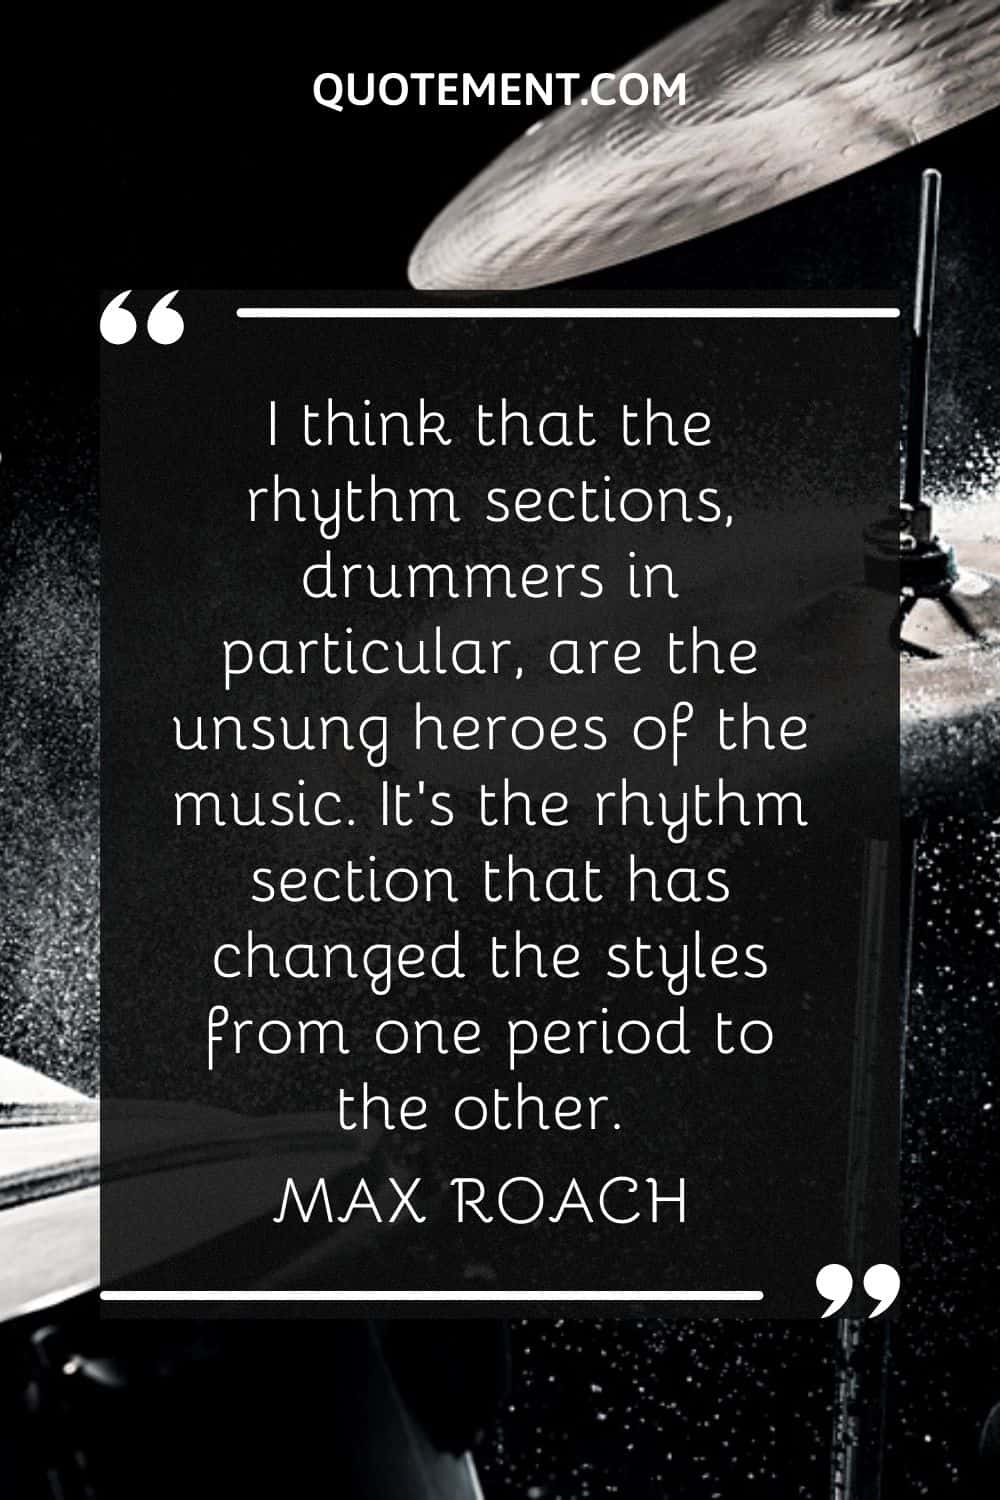 I think that the rhythm sections, drummers in particular, are the unsung heroes of the music